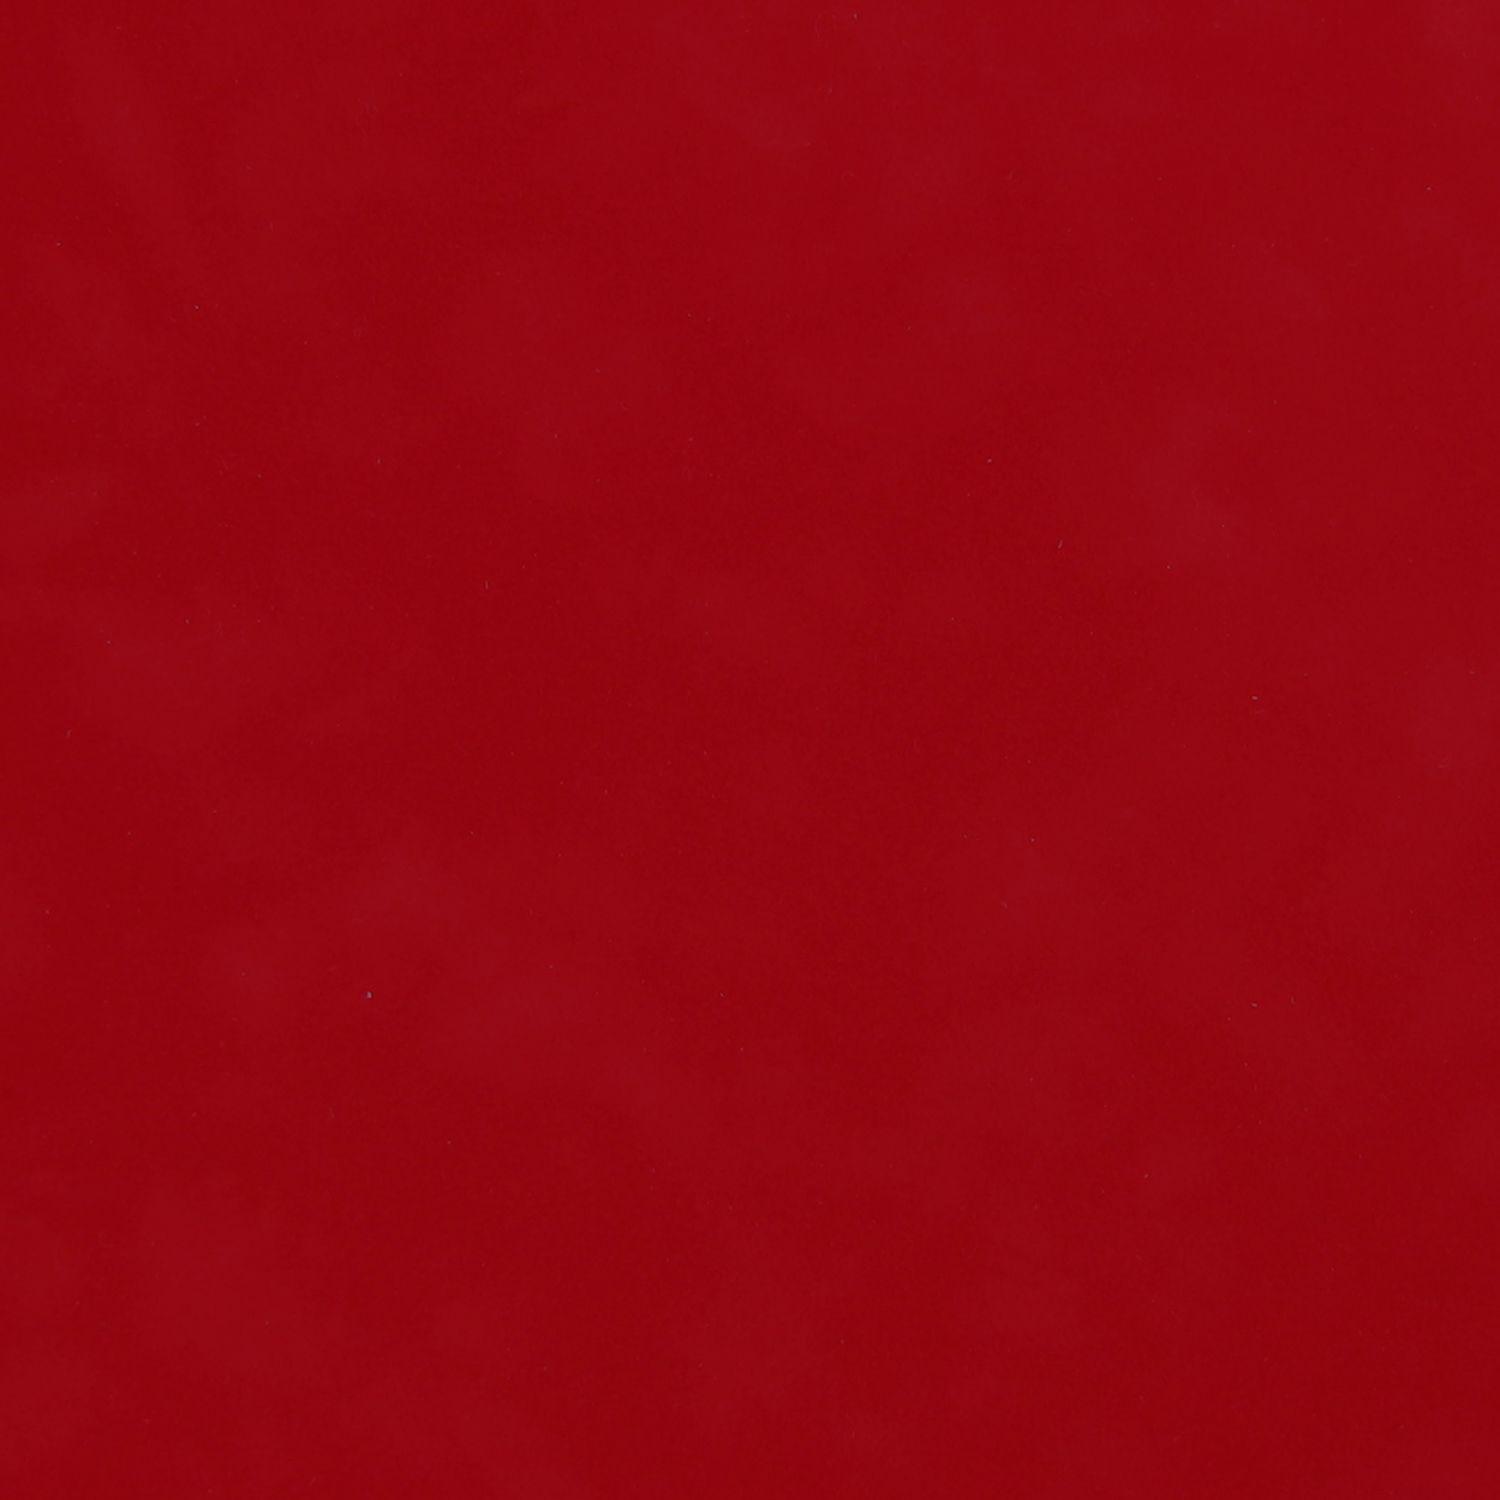 The Color Red Background. Red Christmas